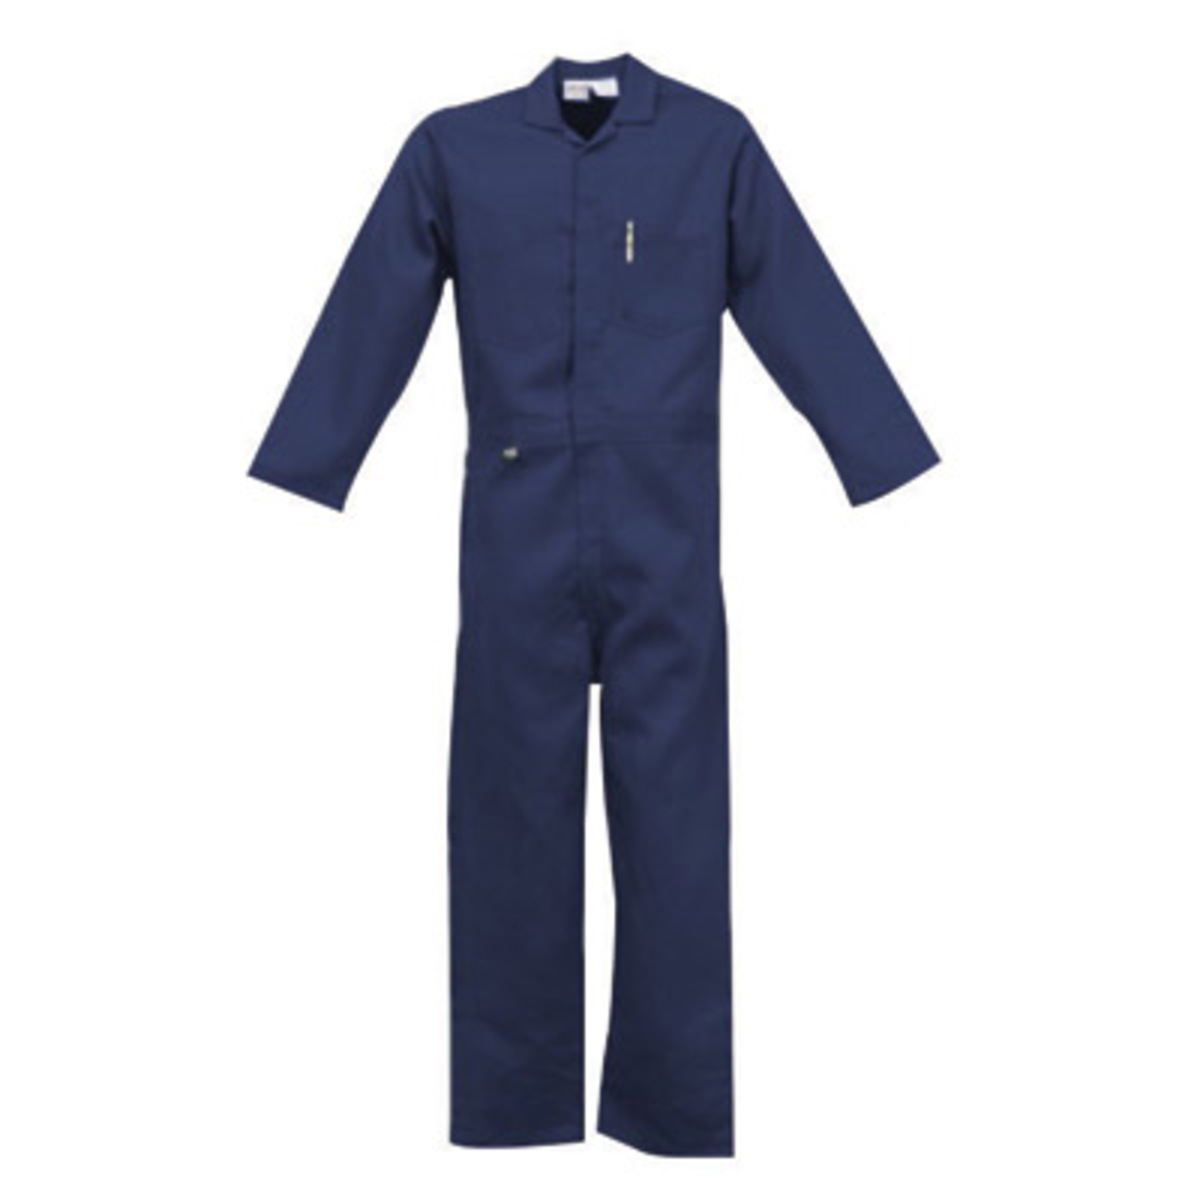 Stanco Safety Products™ Size 3X Navy Blue Indura® UltraSoft® Arc Rated Flame Resistant Coveralls With Front Zipper Closure